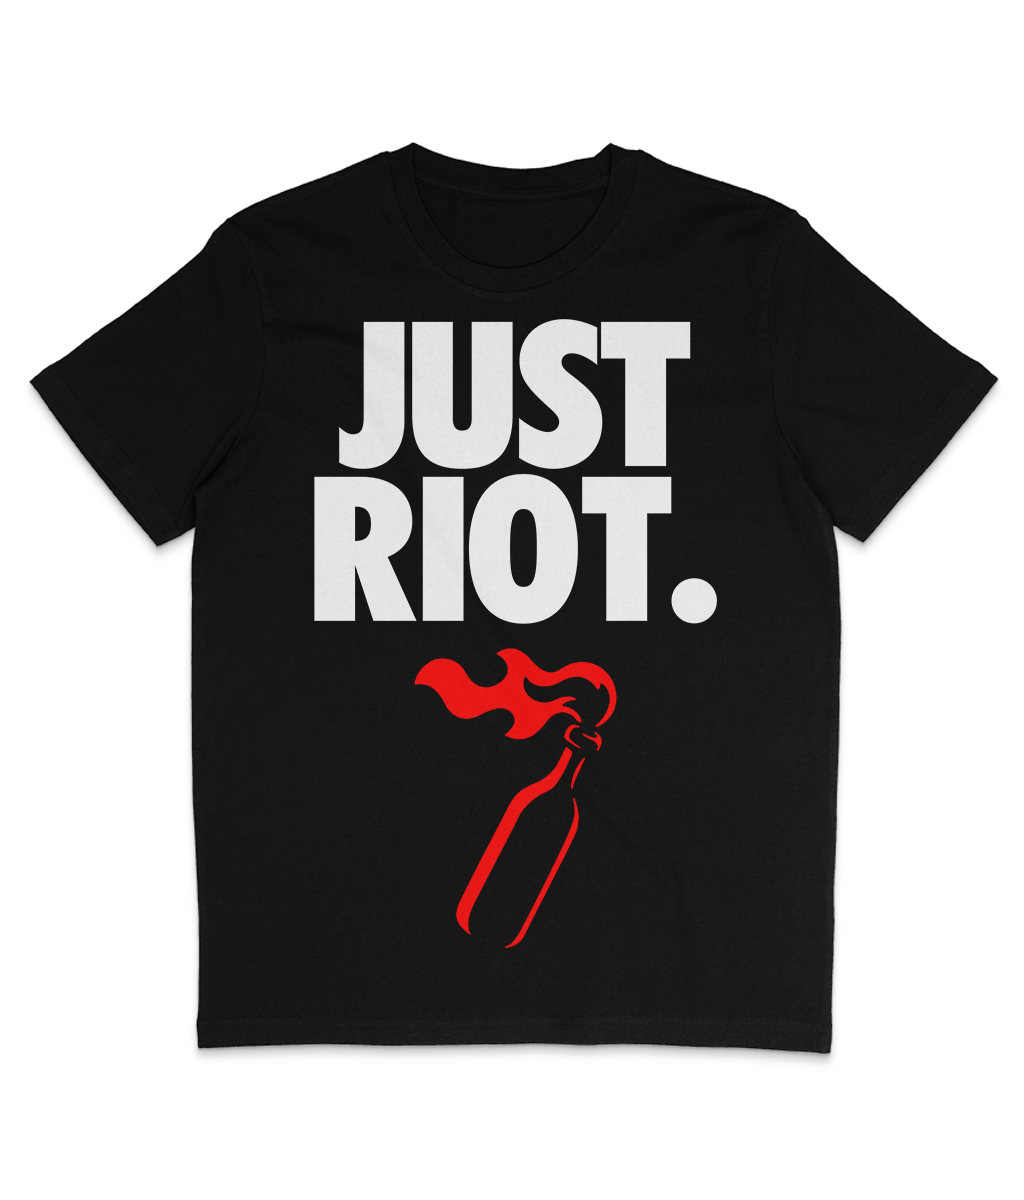 JUST RIOT. - Large Print - White Text